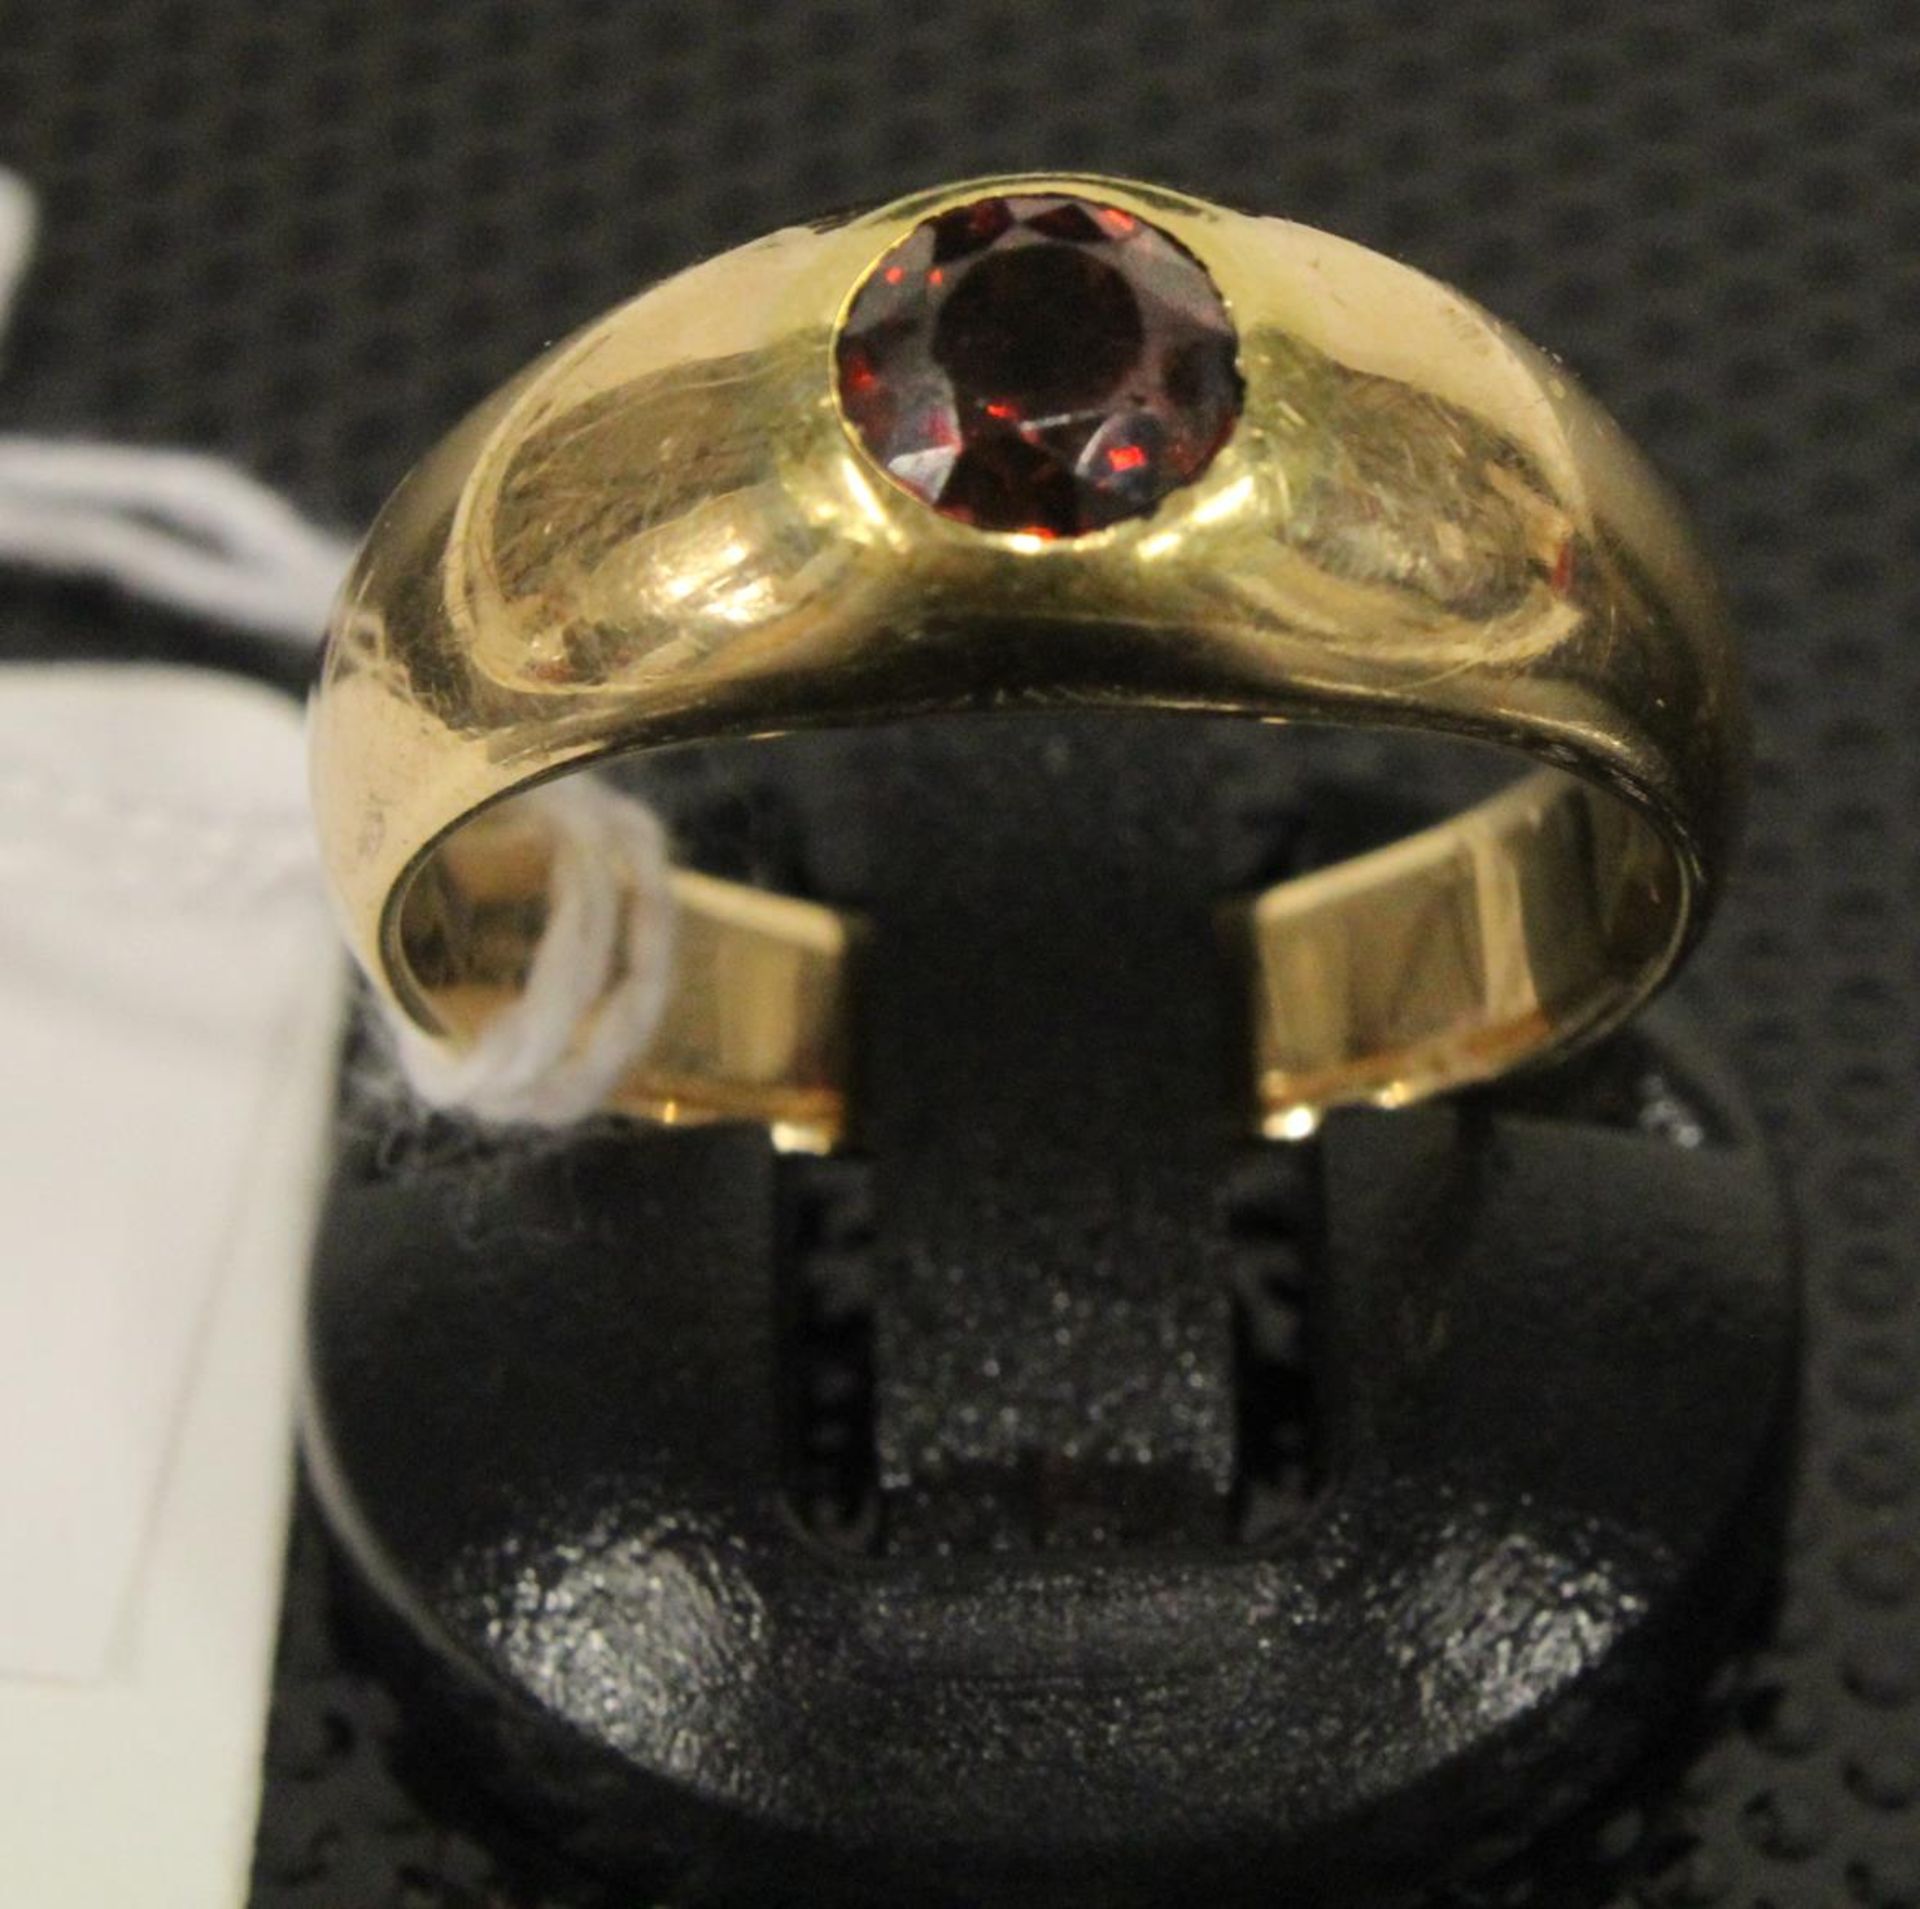 A Gentleman's 18ct Gold Signet Ring set with a single Ruby (?) size Q/R cased. (Est. £100 - £200) - Image 2 of 3